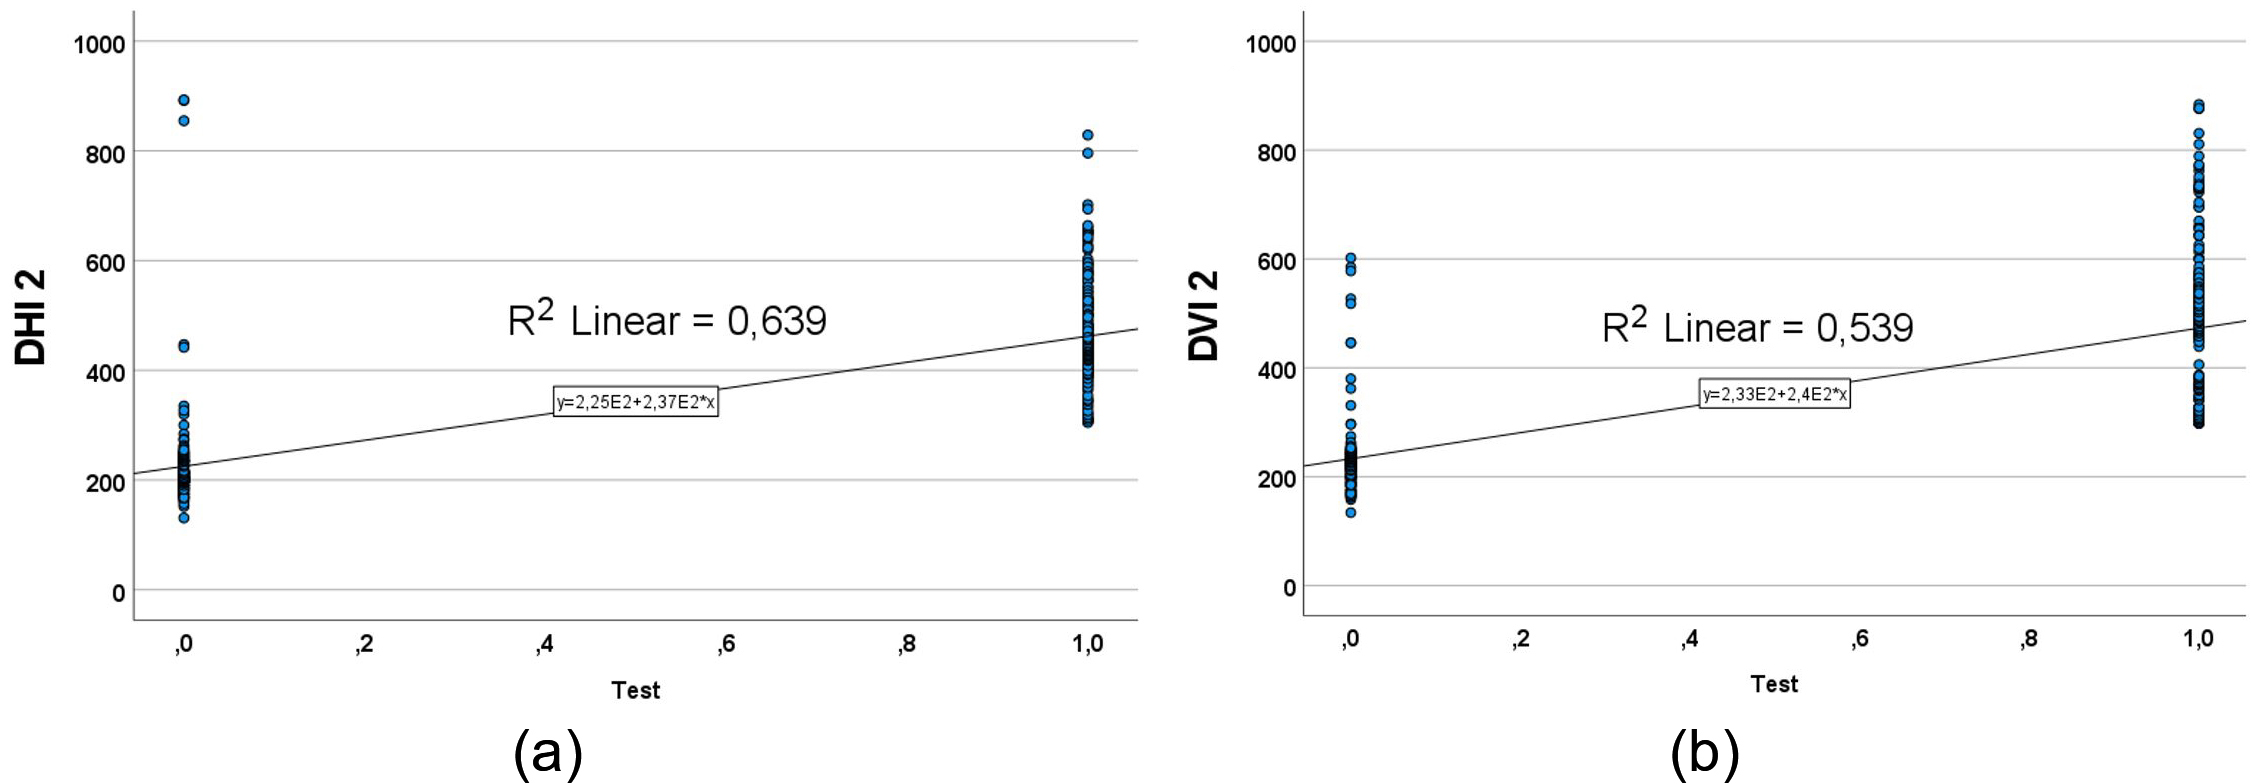 Point-biserial correlation coefficients show a relation between the values of DHI 2 (a), and DVI 2 (b) for pair of days, reference (0) and the test (1).